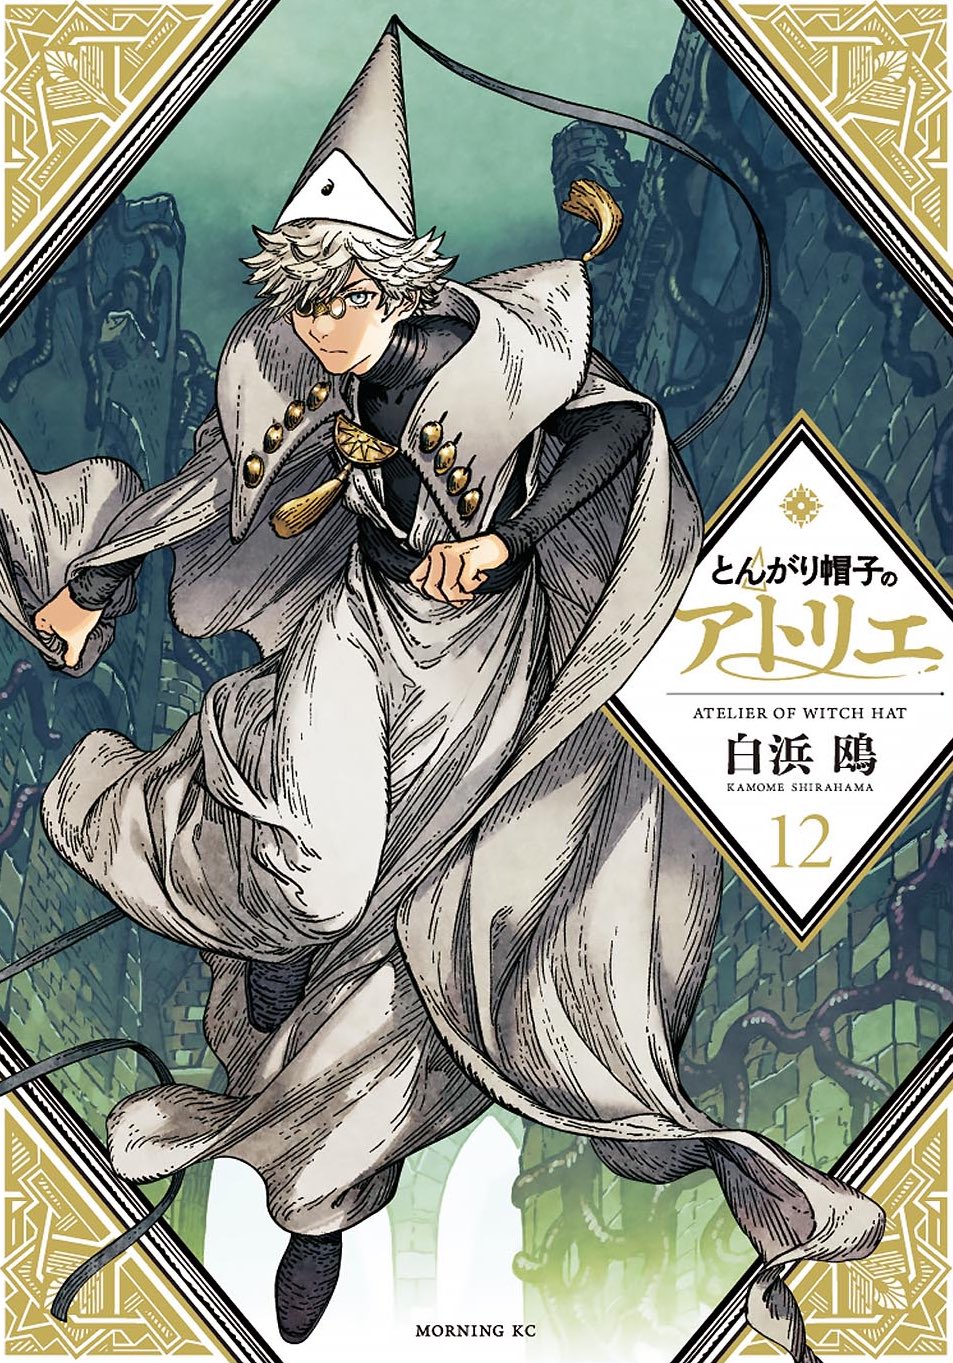 Witch Hat Atelier Updates on X: Cover for Volume 12 of Witch Hat Atelier  features Qifrey. Volume releases on June 22 in Japan!   / X